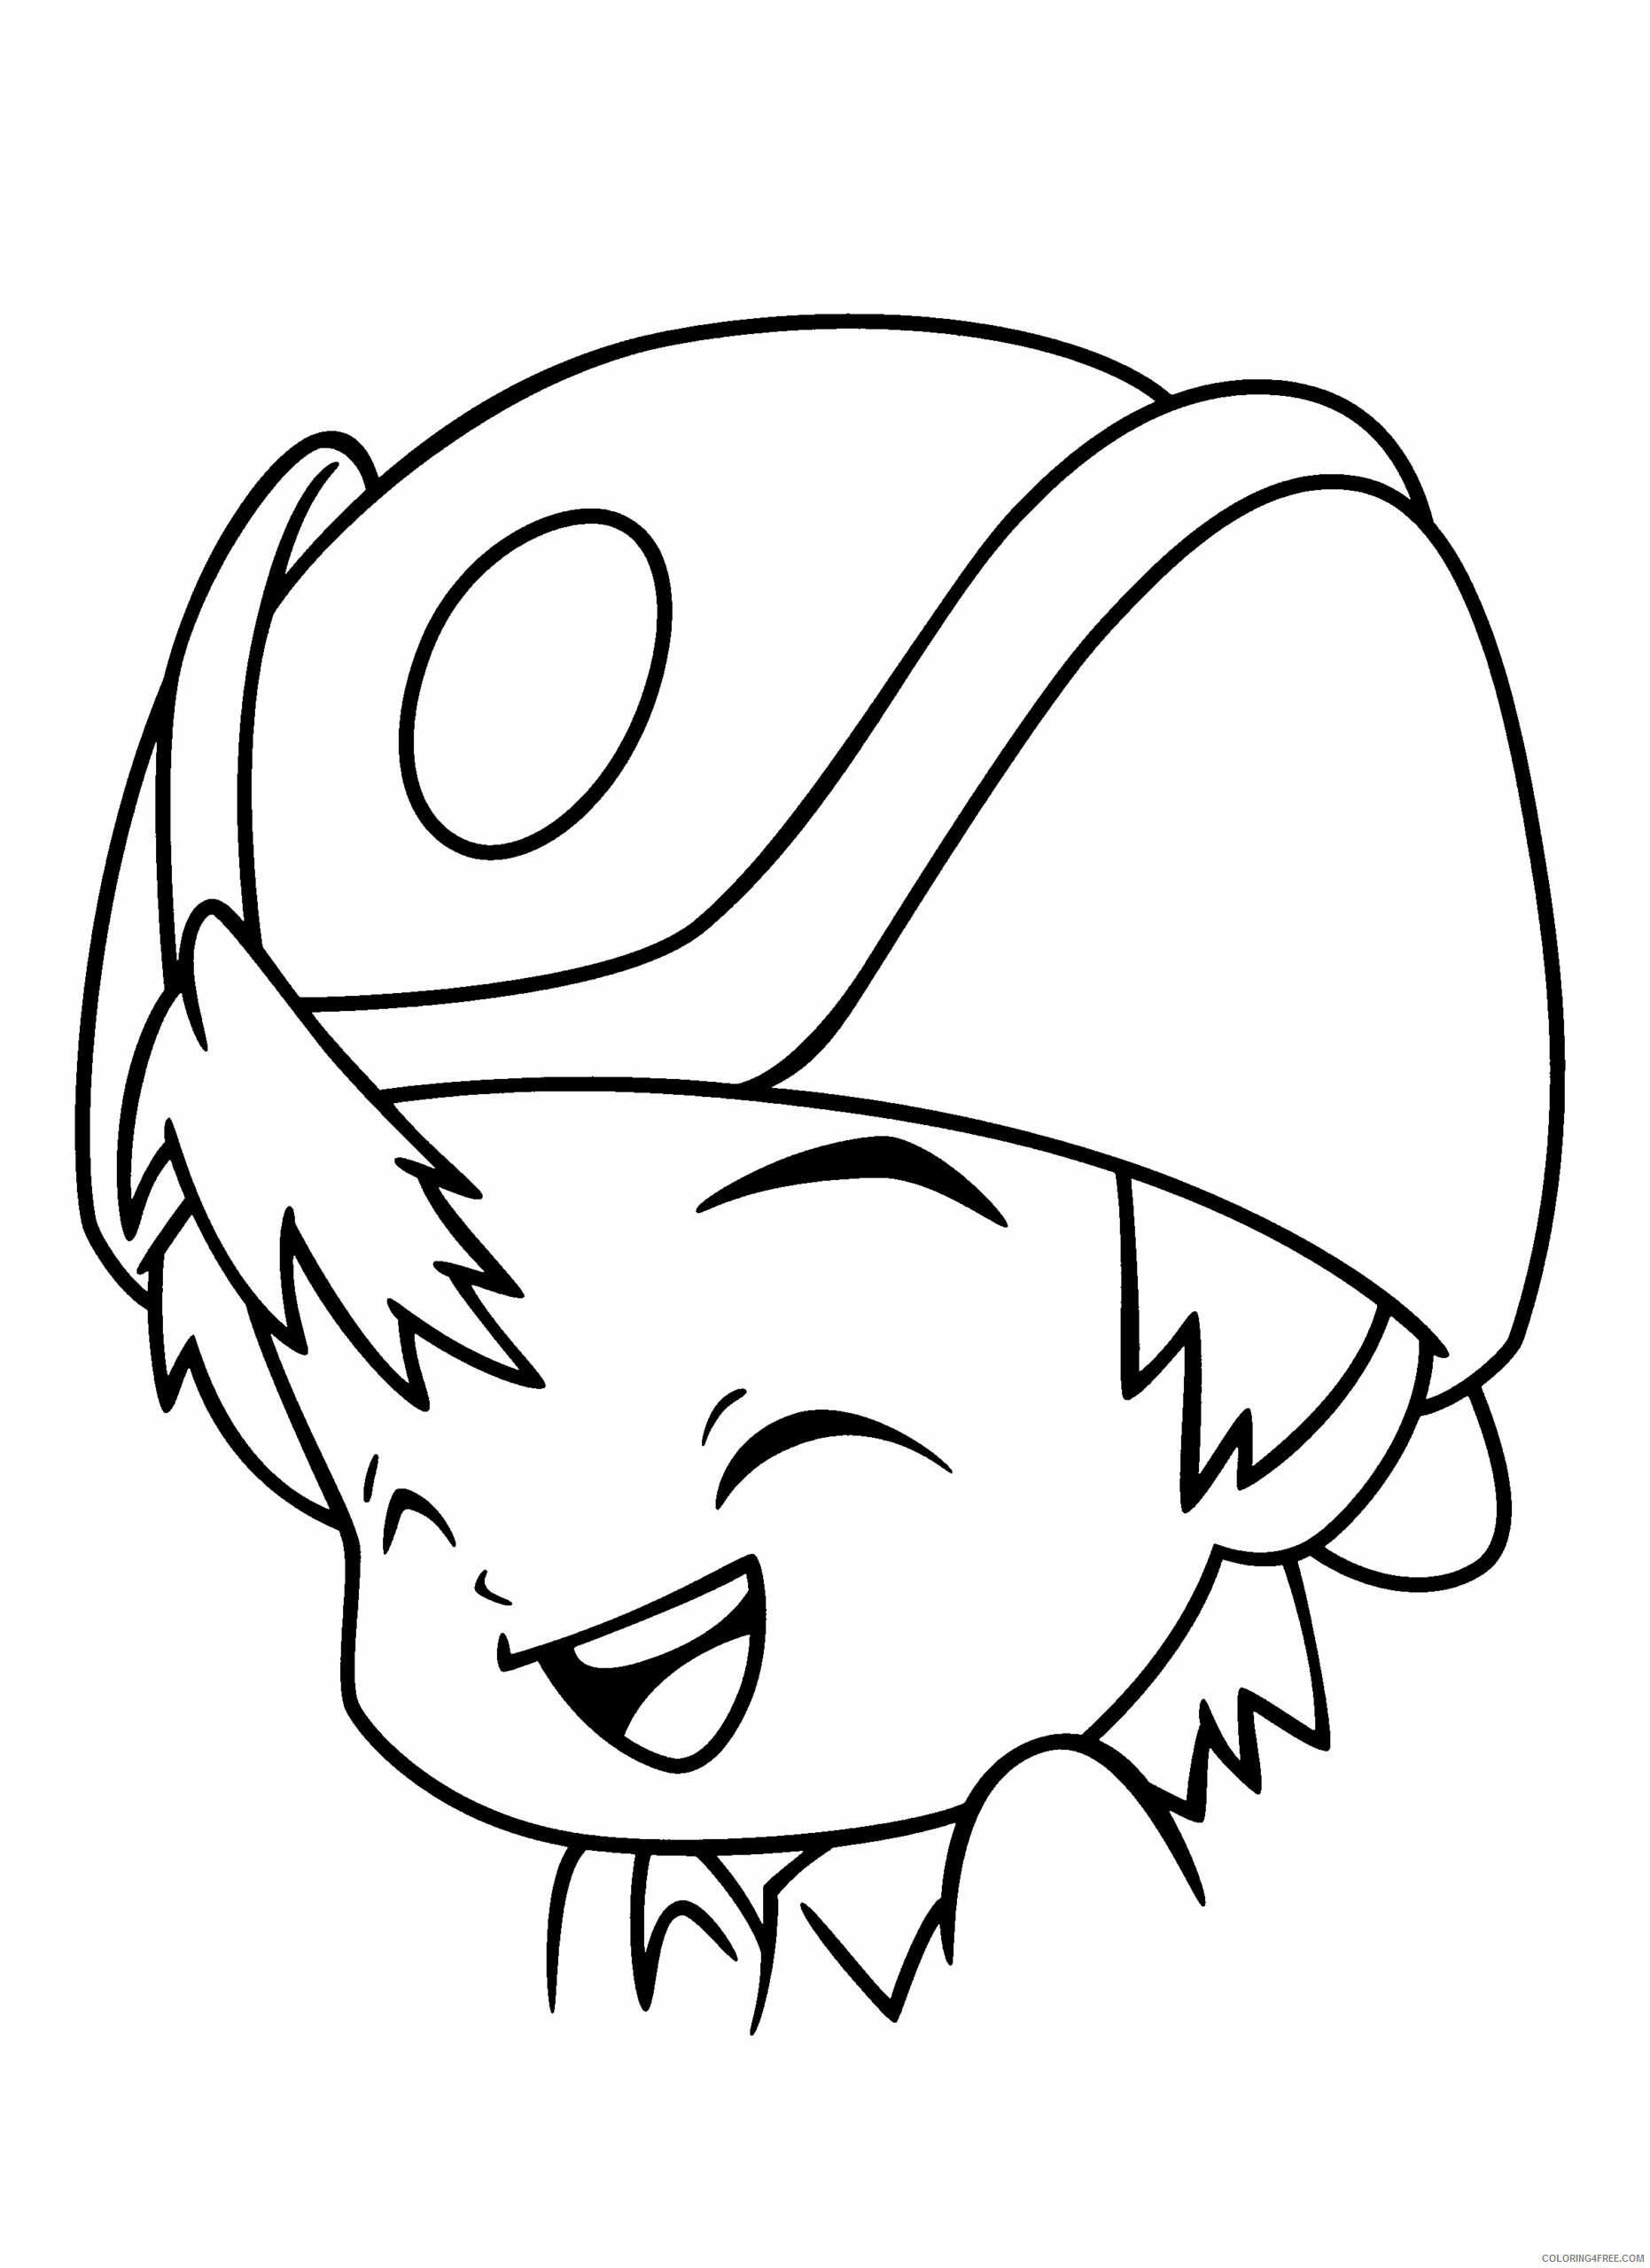 Digimon Printable Coloring Pages Anime digimon 03aOs 2021 0148 Coloring4free